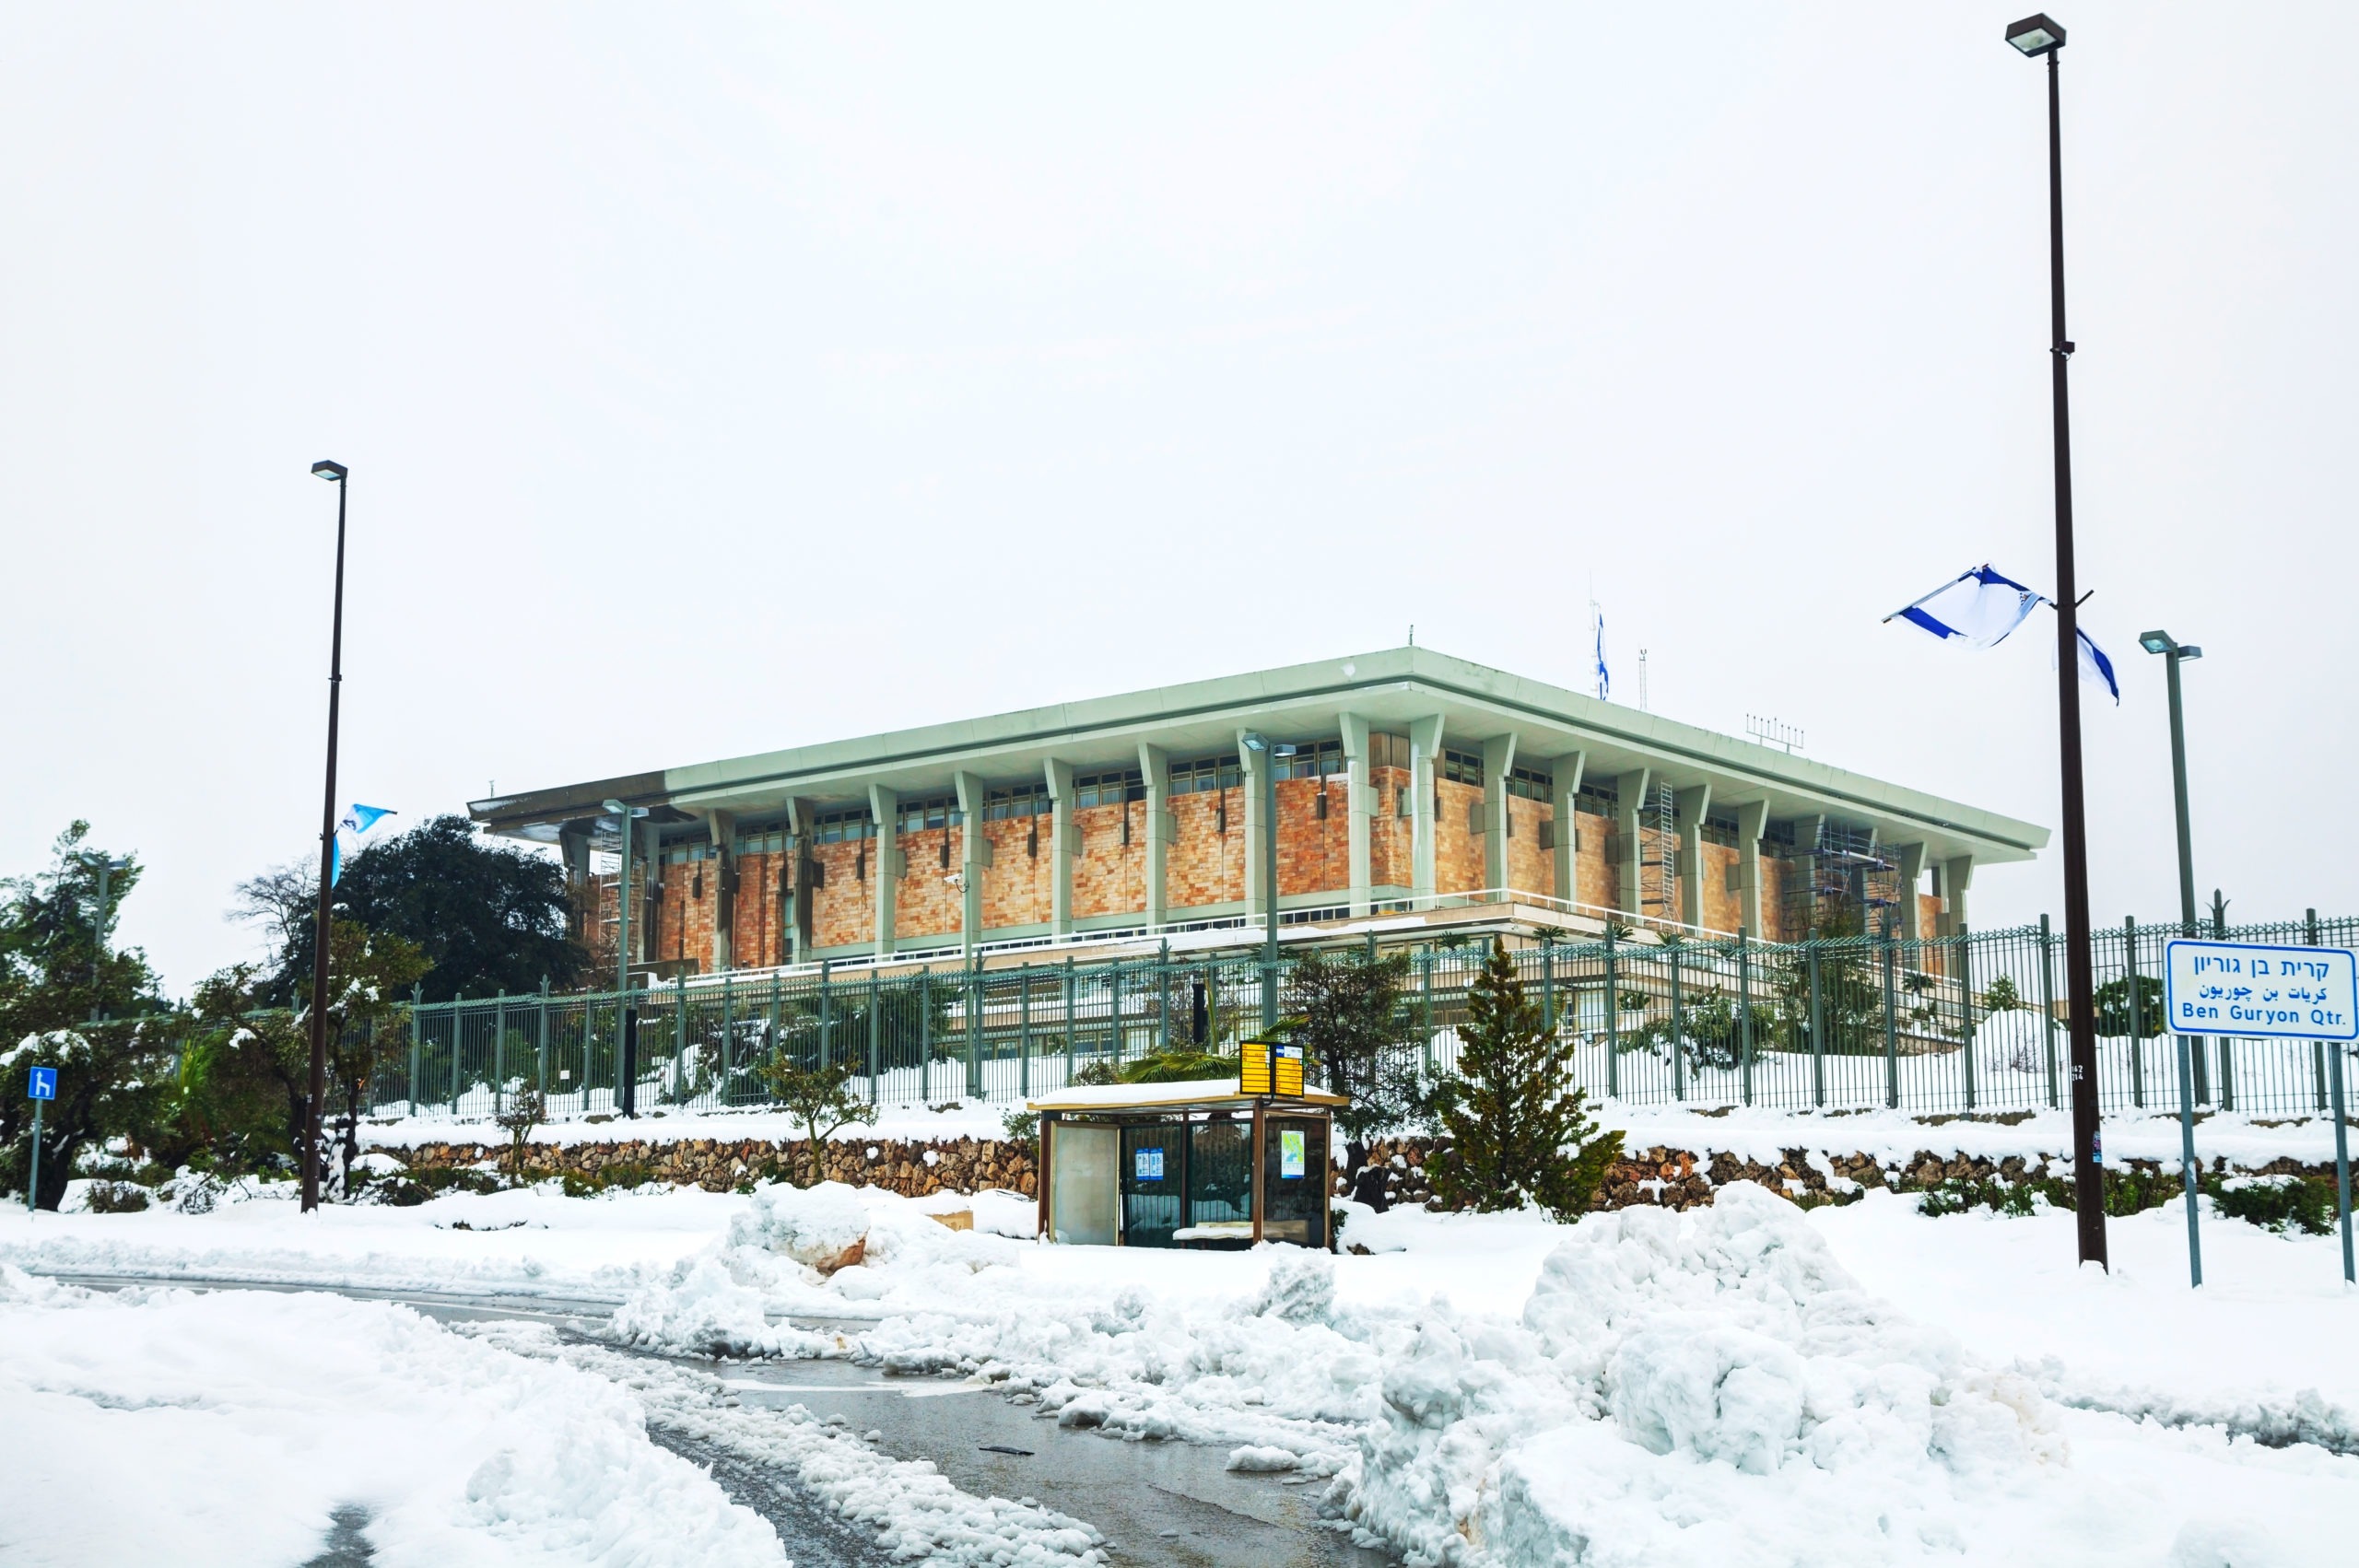 knesset covered in snow